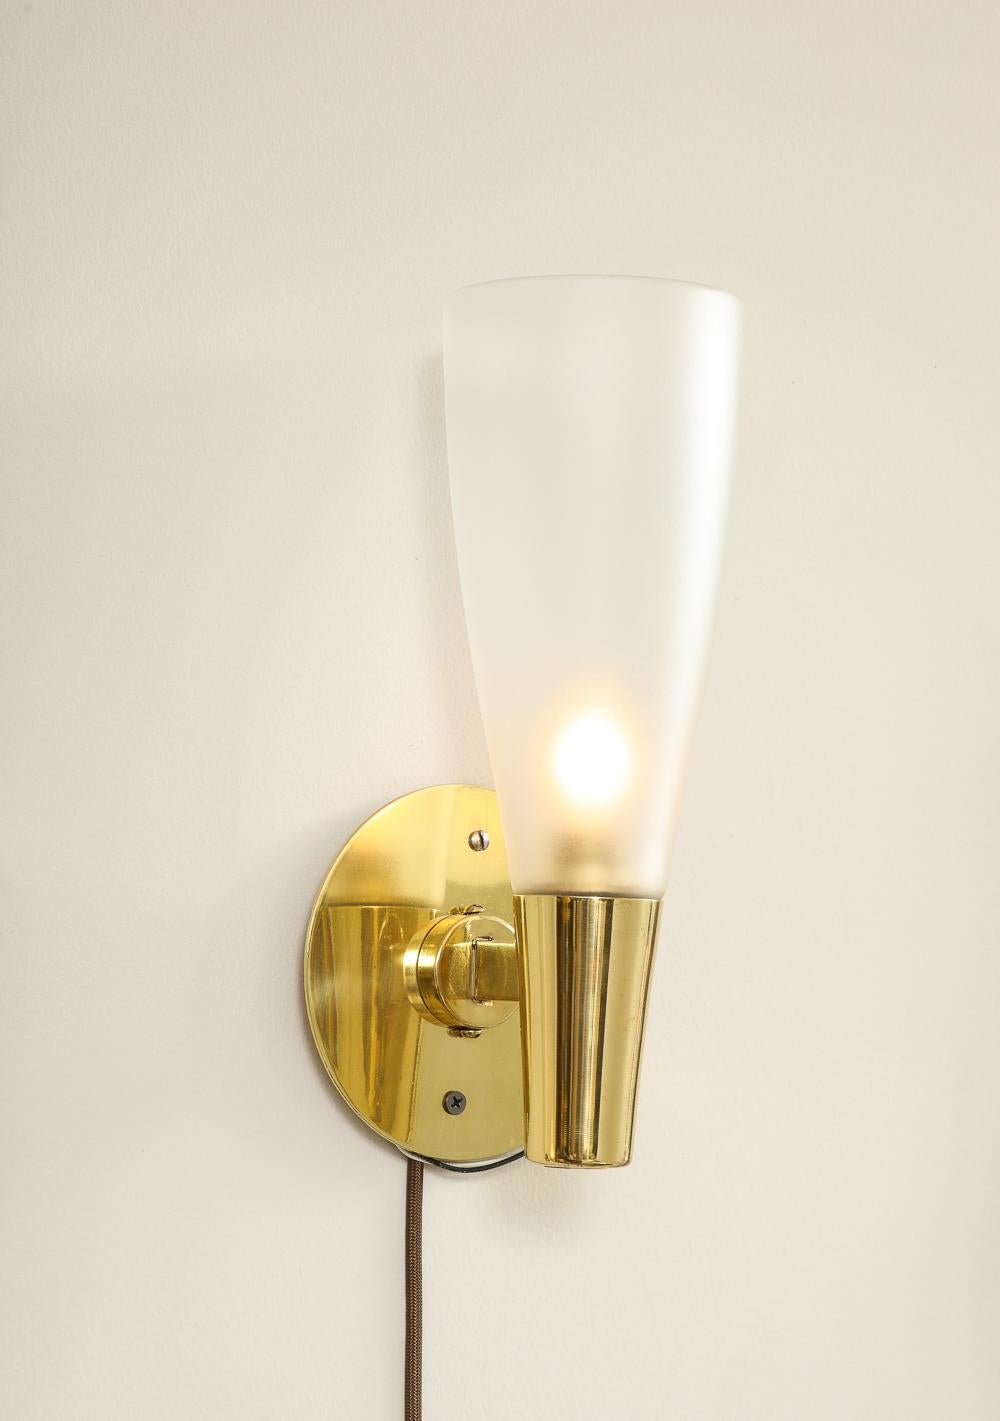 Model 1537 sconces by Max Ingrand for Fontana Arte. Polished brass, frosted glass. Each light has 1 x E12 (candelabra) socket.